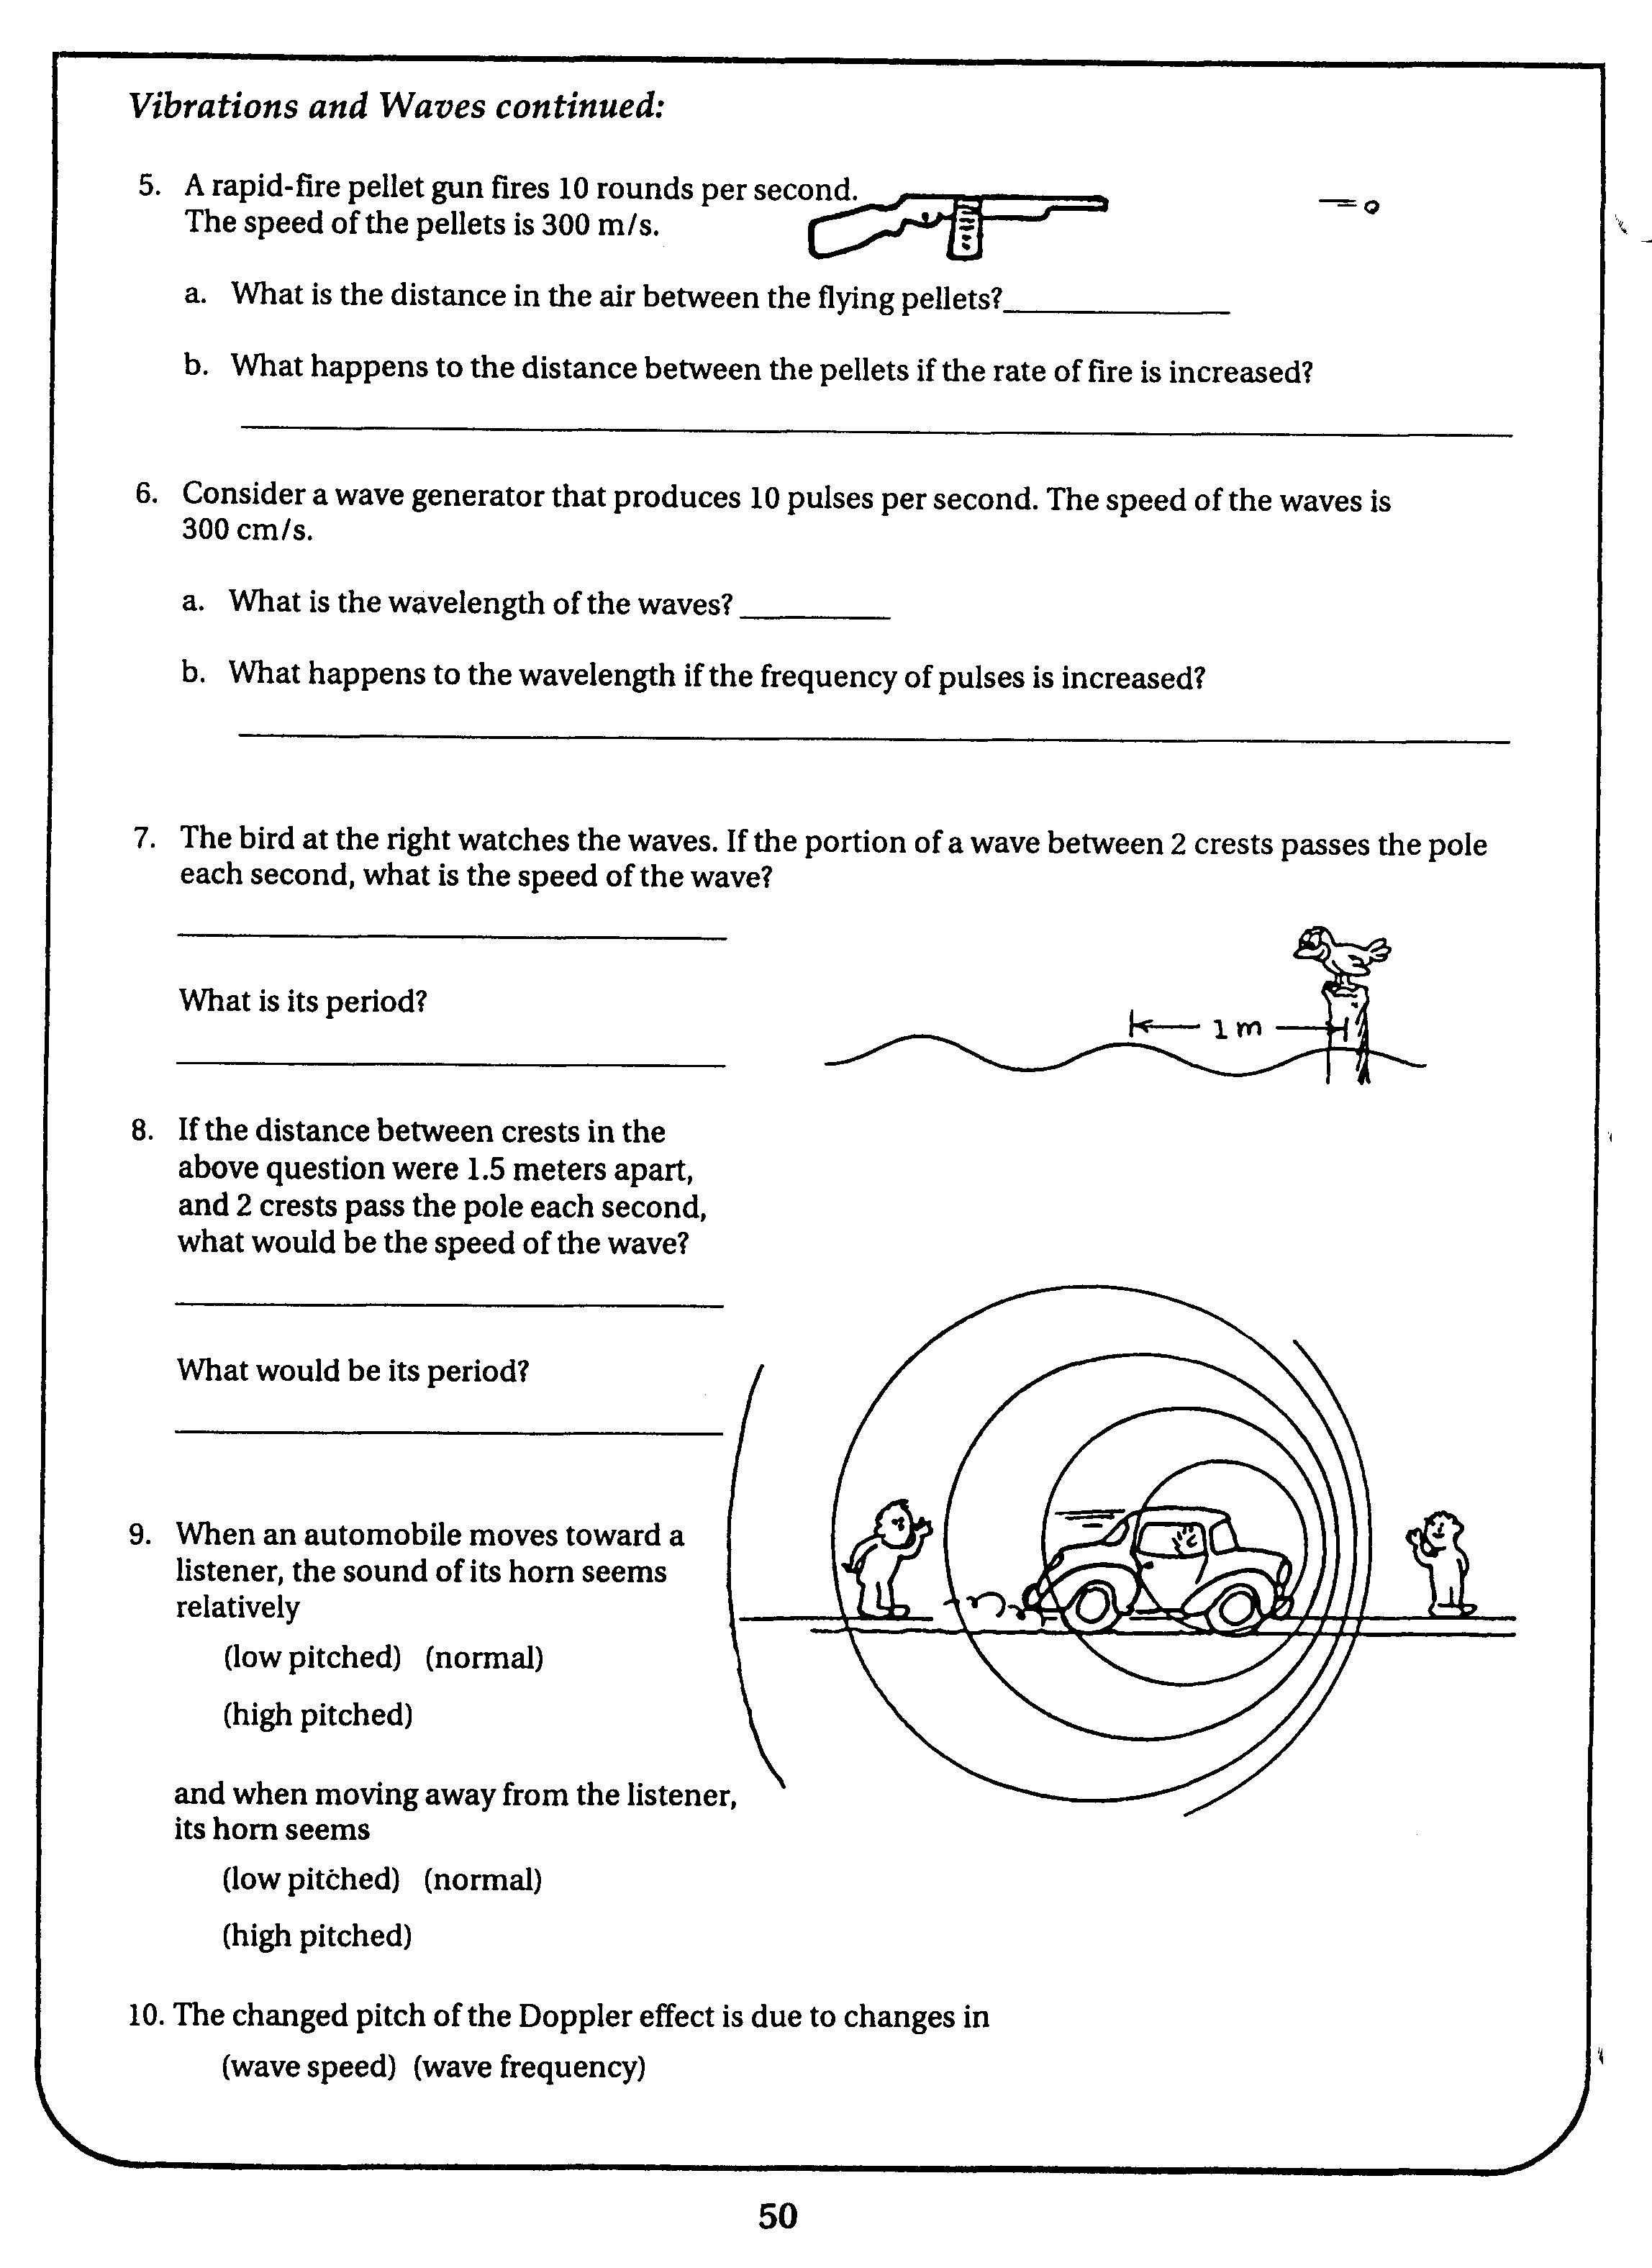 The Electromagnetic Spectrum Worksheet Answers